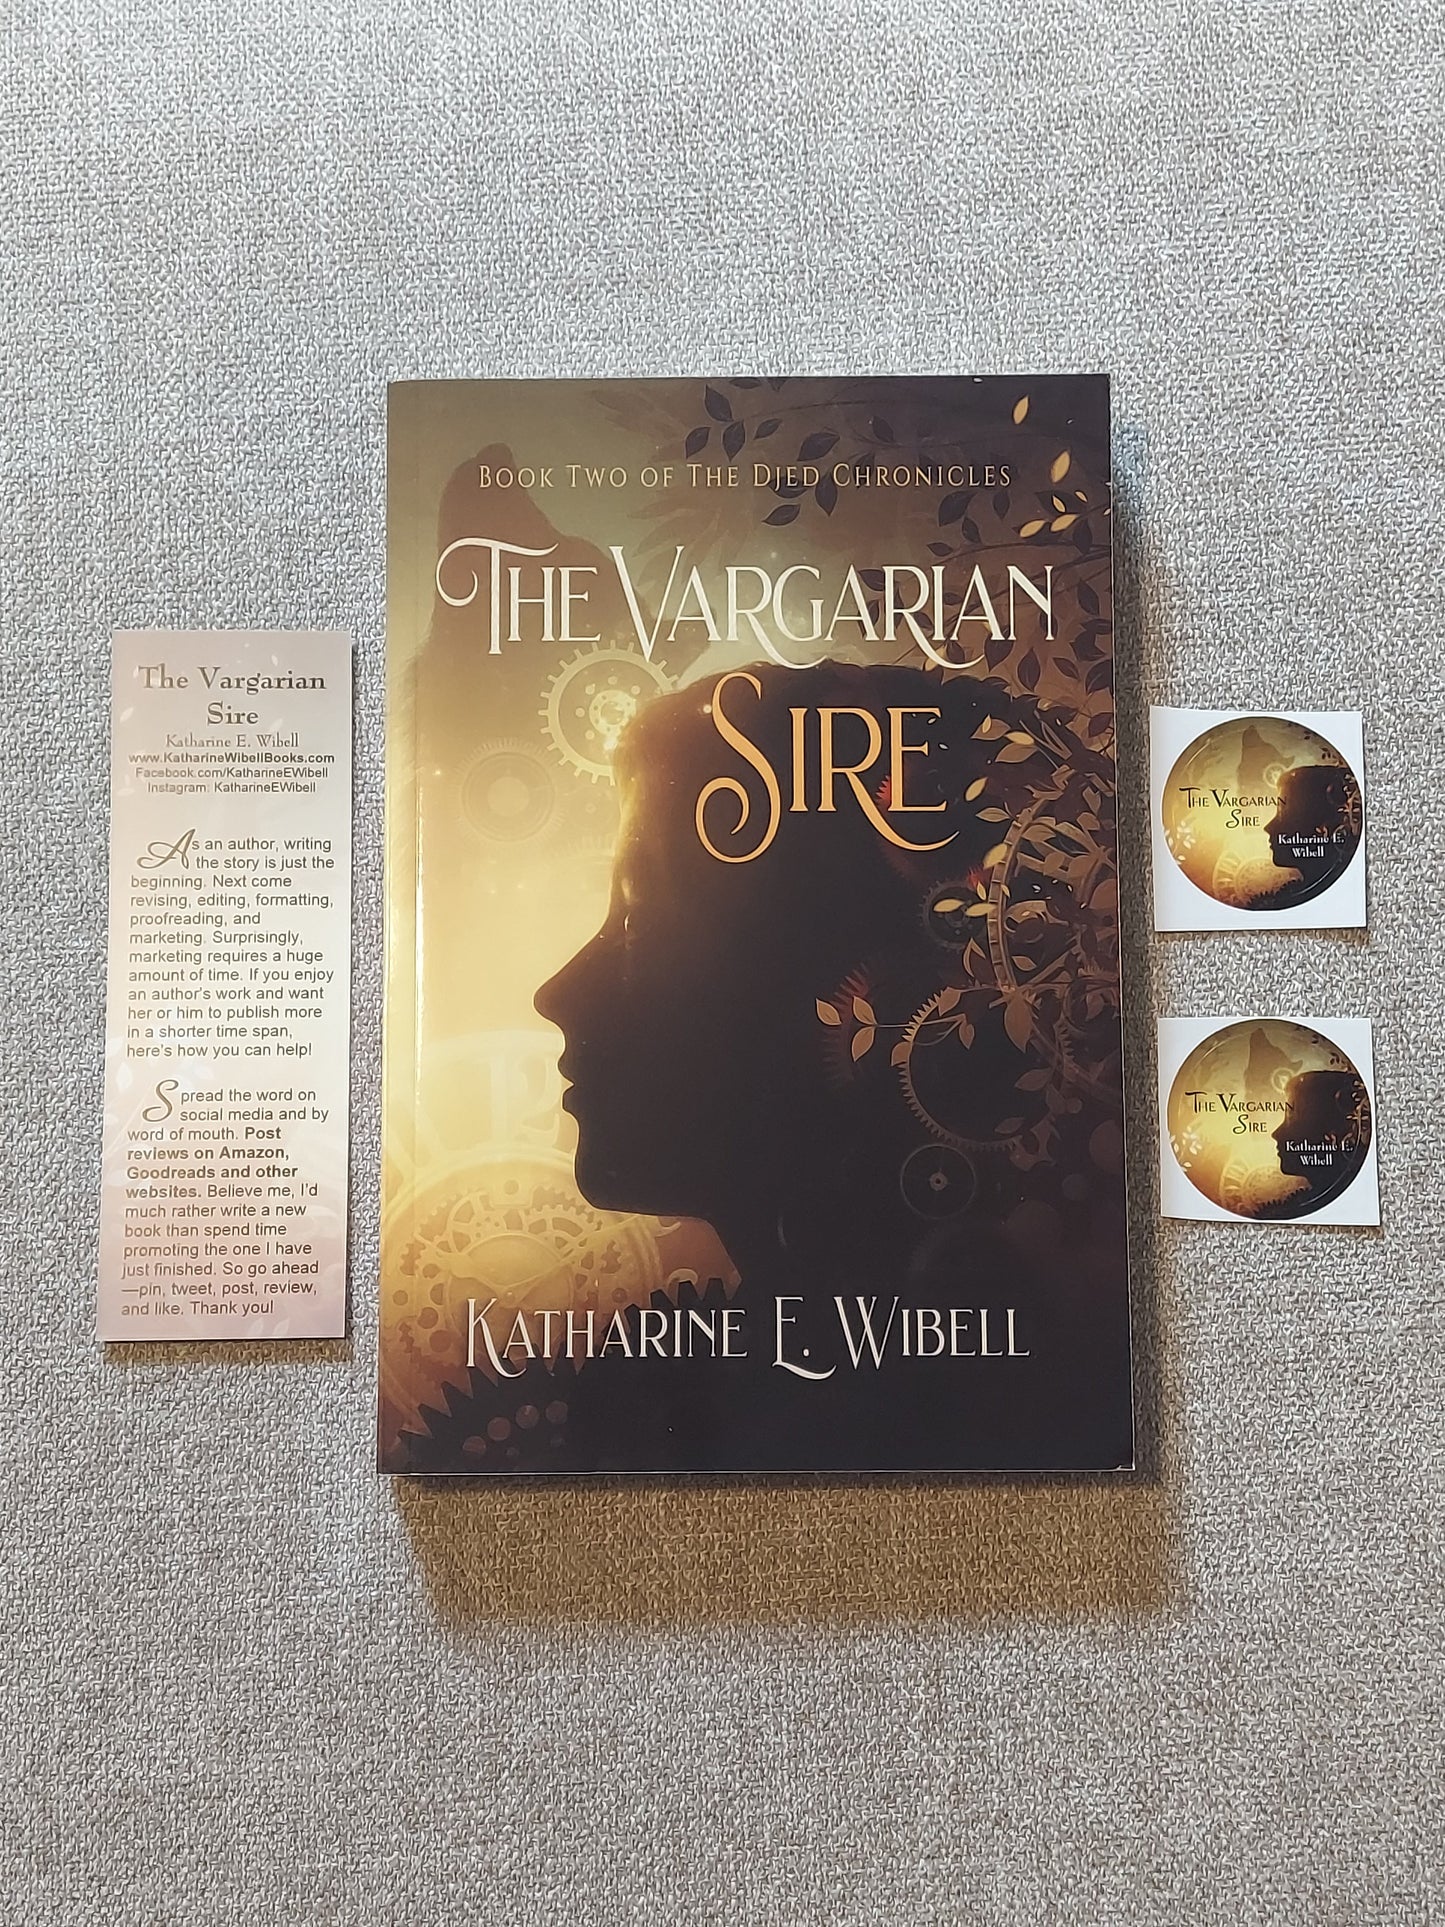 Print Formats - The Vargarian Sire: Book Two of The Djed Chronicles